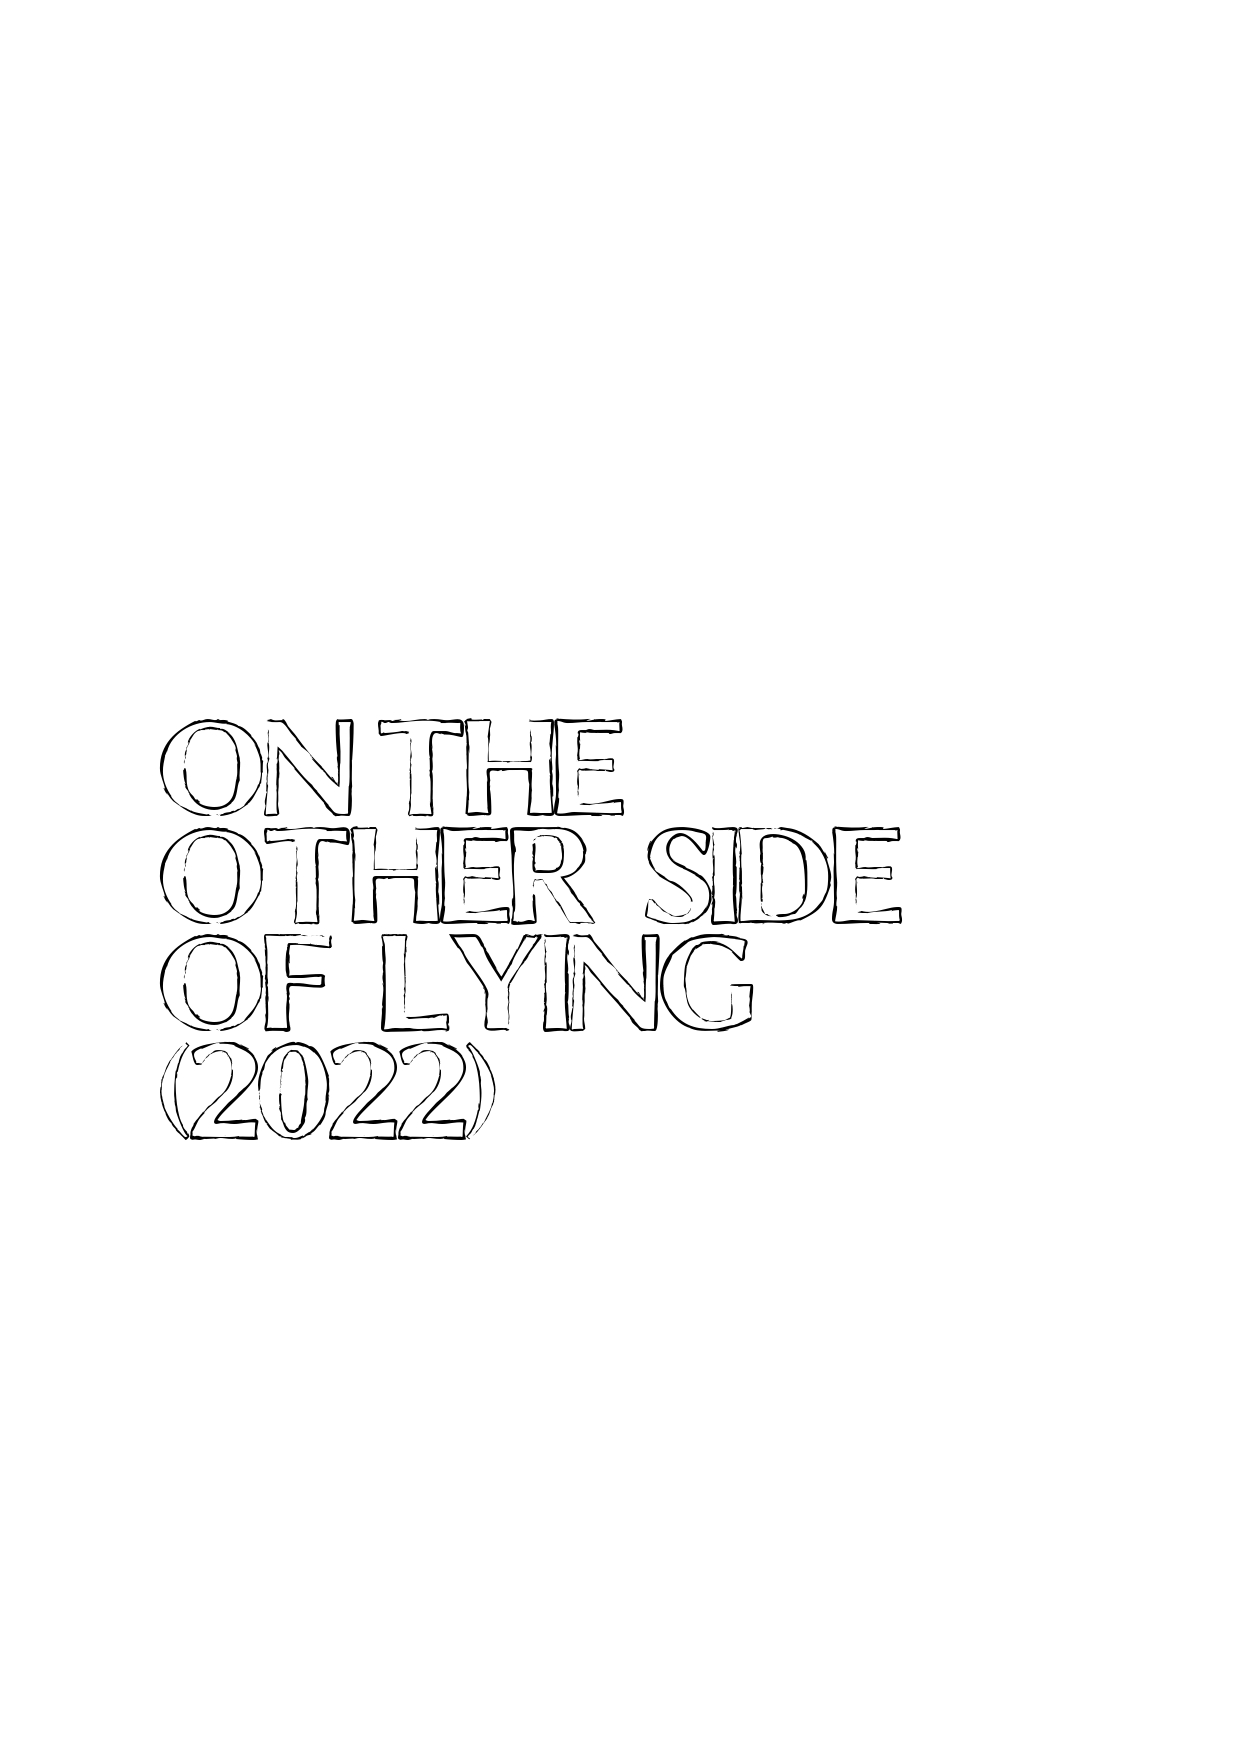 On the Other Side of Lying(2022)